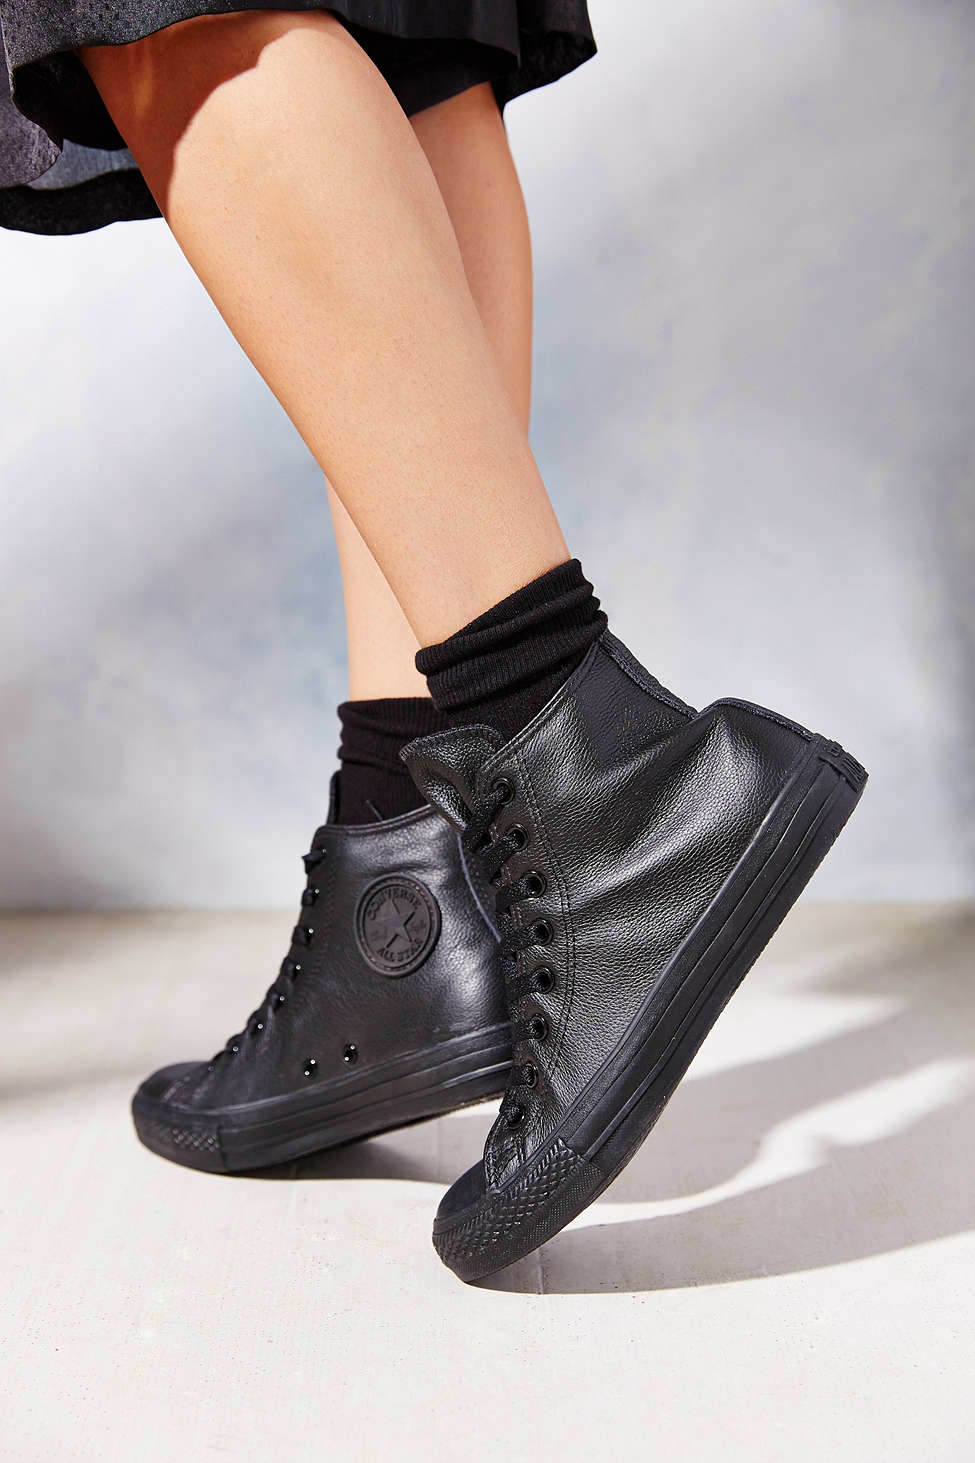 Converse Chuck Taylor All Star Leather High Top Sneaker in Black | Lyst  Canada